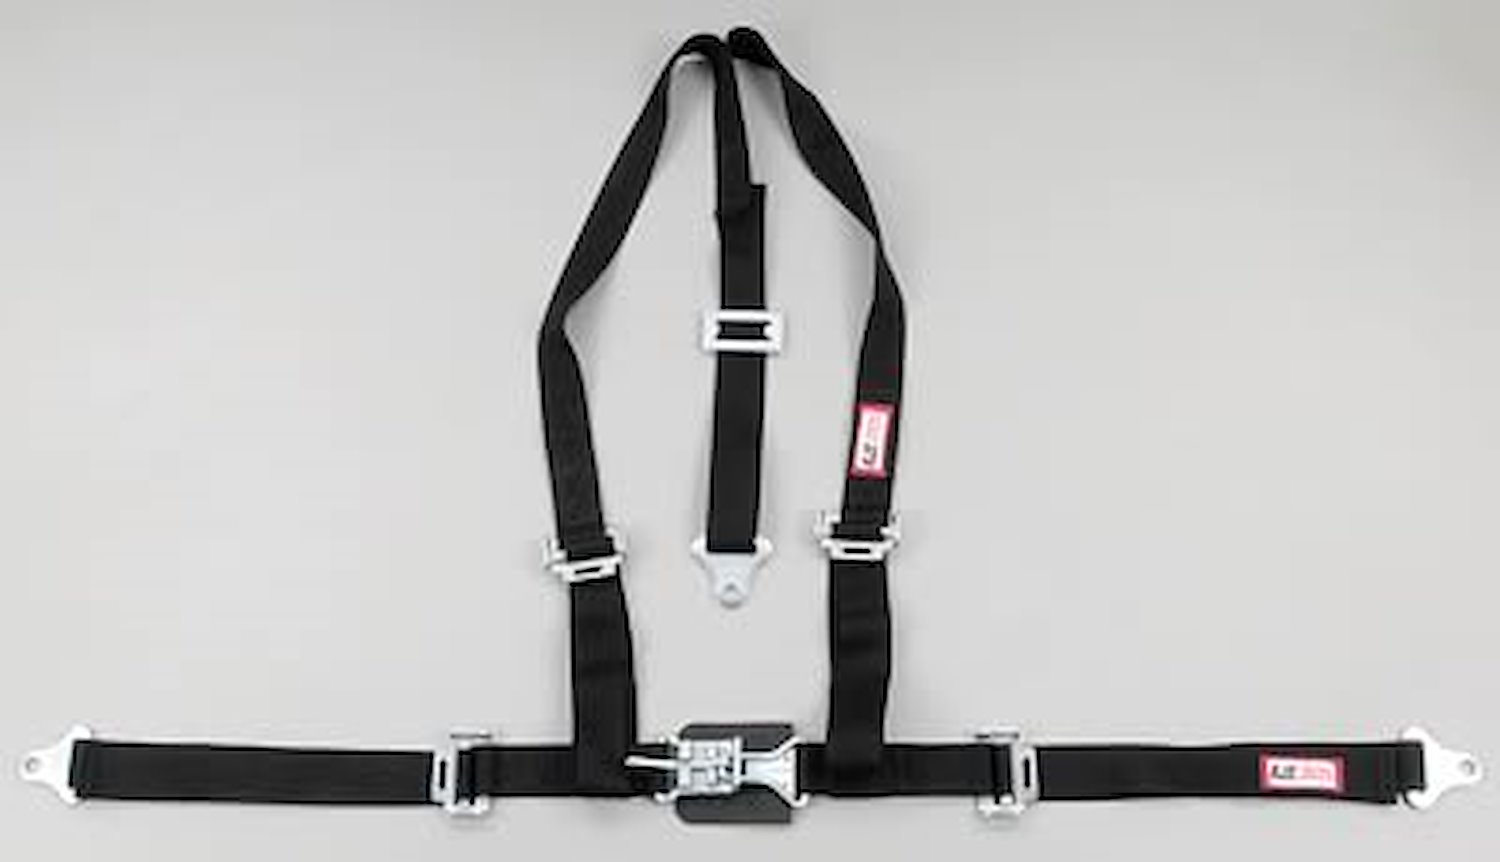 NON-SFI L&L HARNESS 2 PULL DOWN Lap Belt SEWN IN 2 S.H. Y FLOOR Mount ALL WRAP ENDS HOT PINK